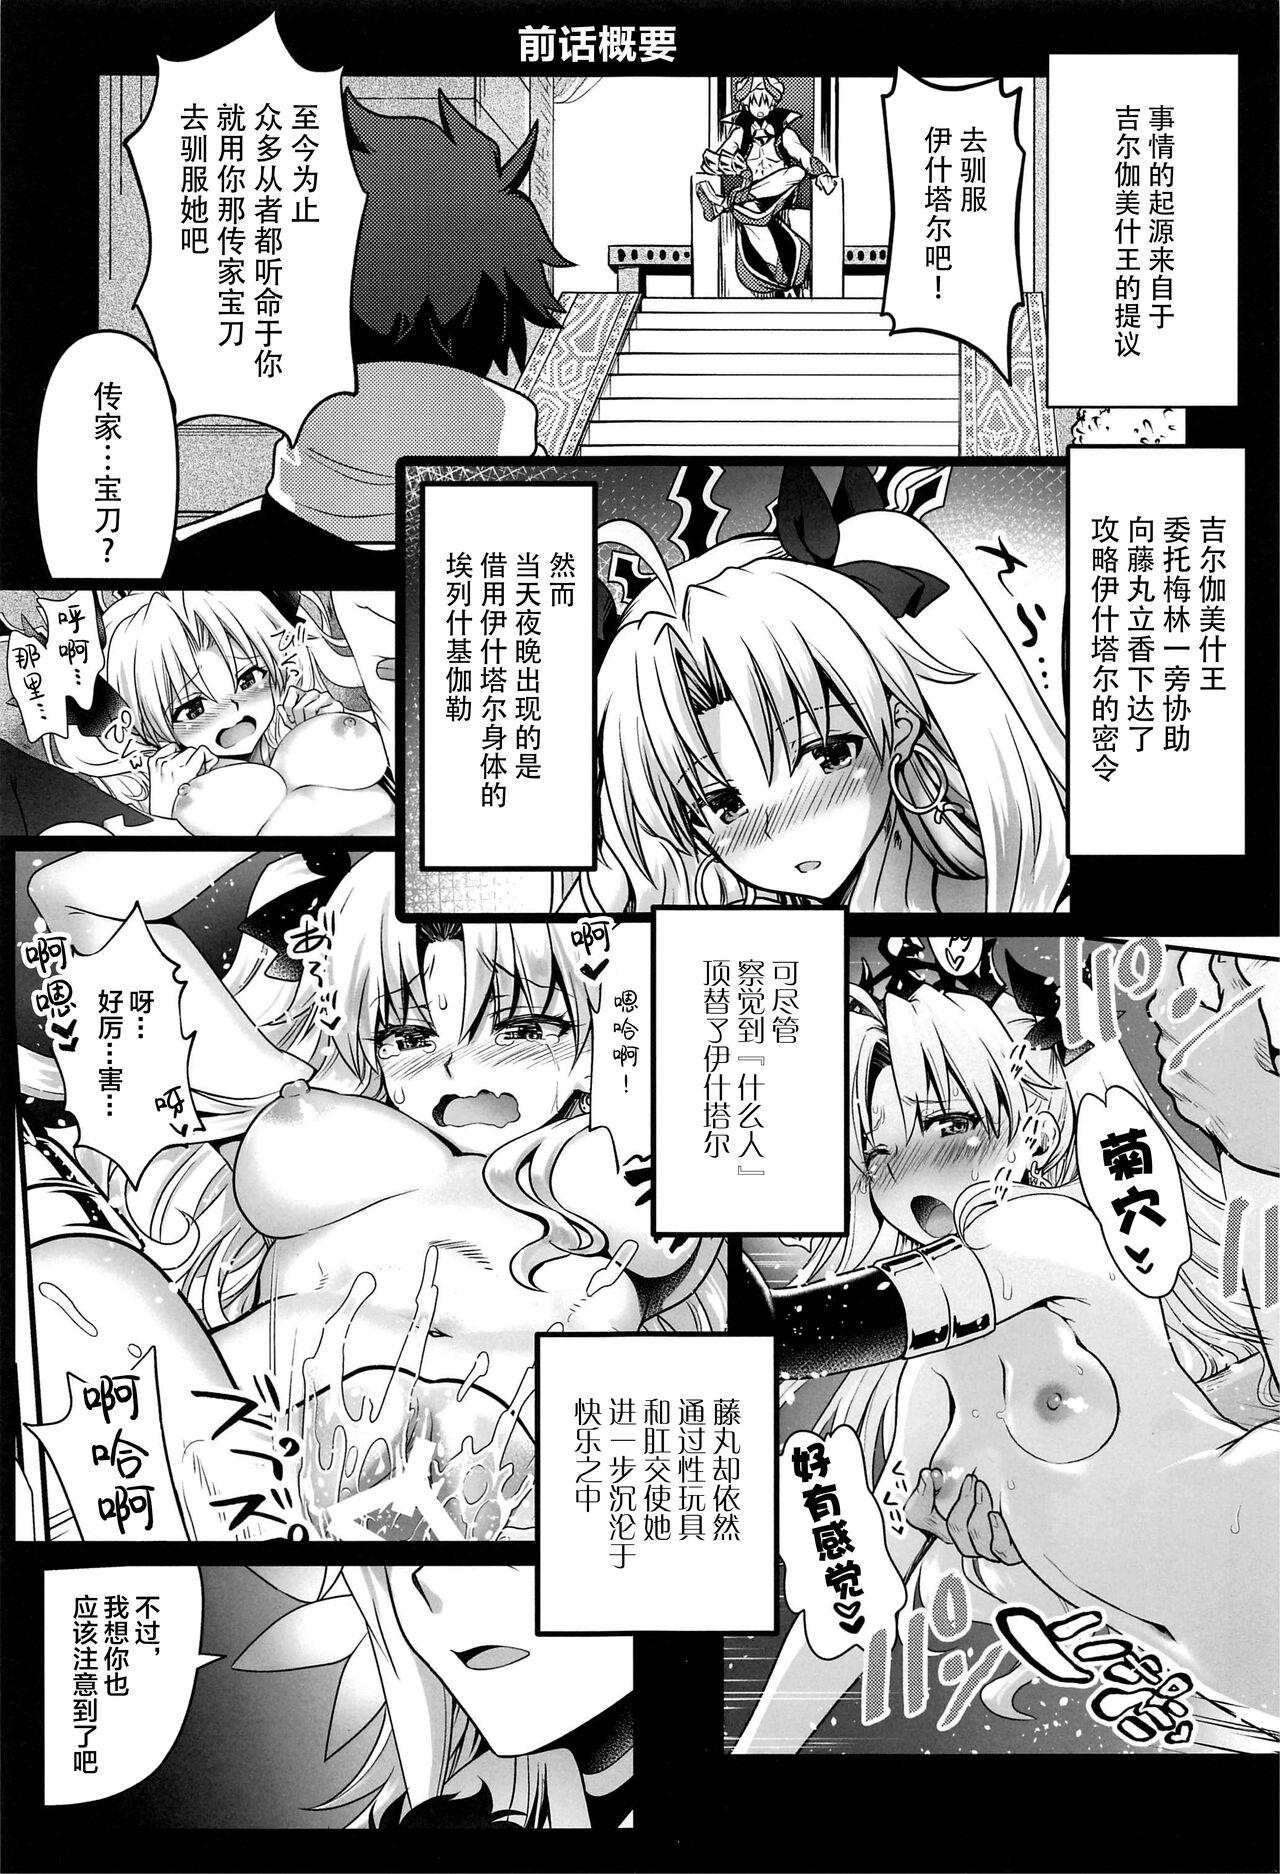 Dancing All Night Romance 3 - Fate grand order Bigtits - Page 2